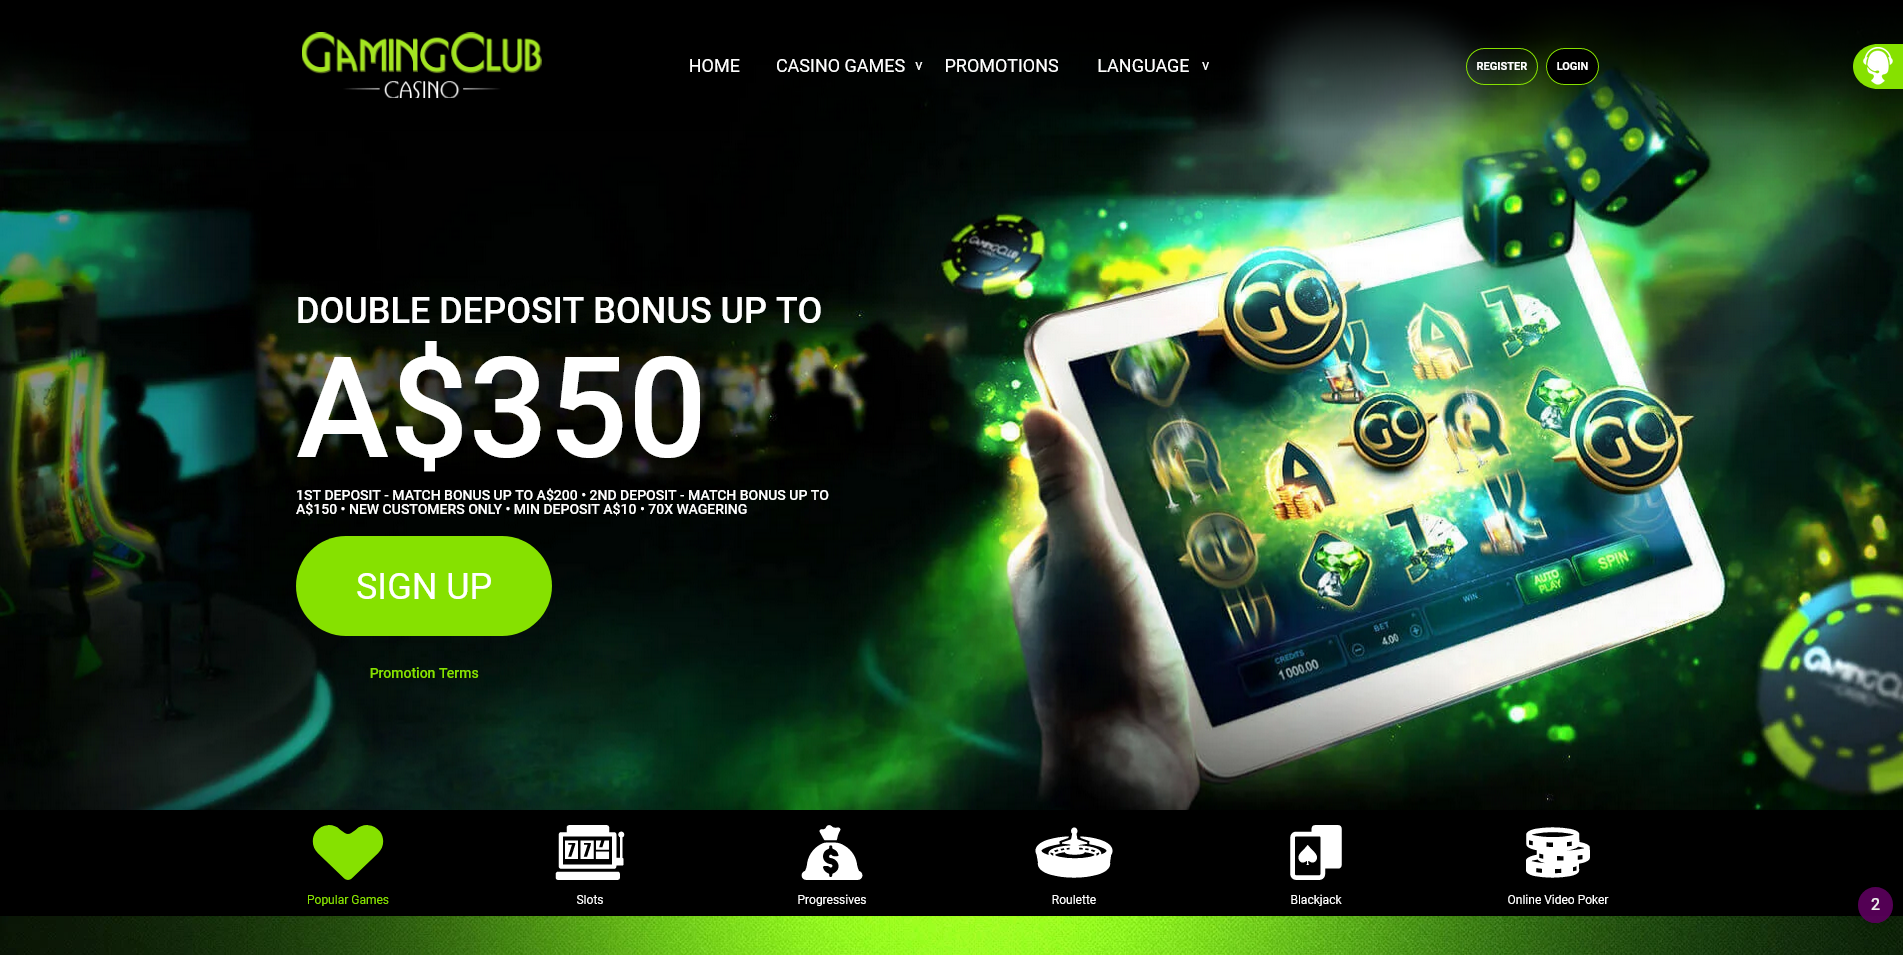 Screenshot of the Gaming Club Casino home page